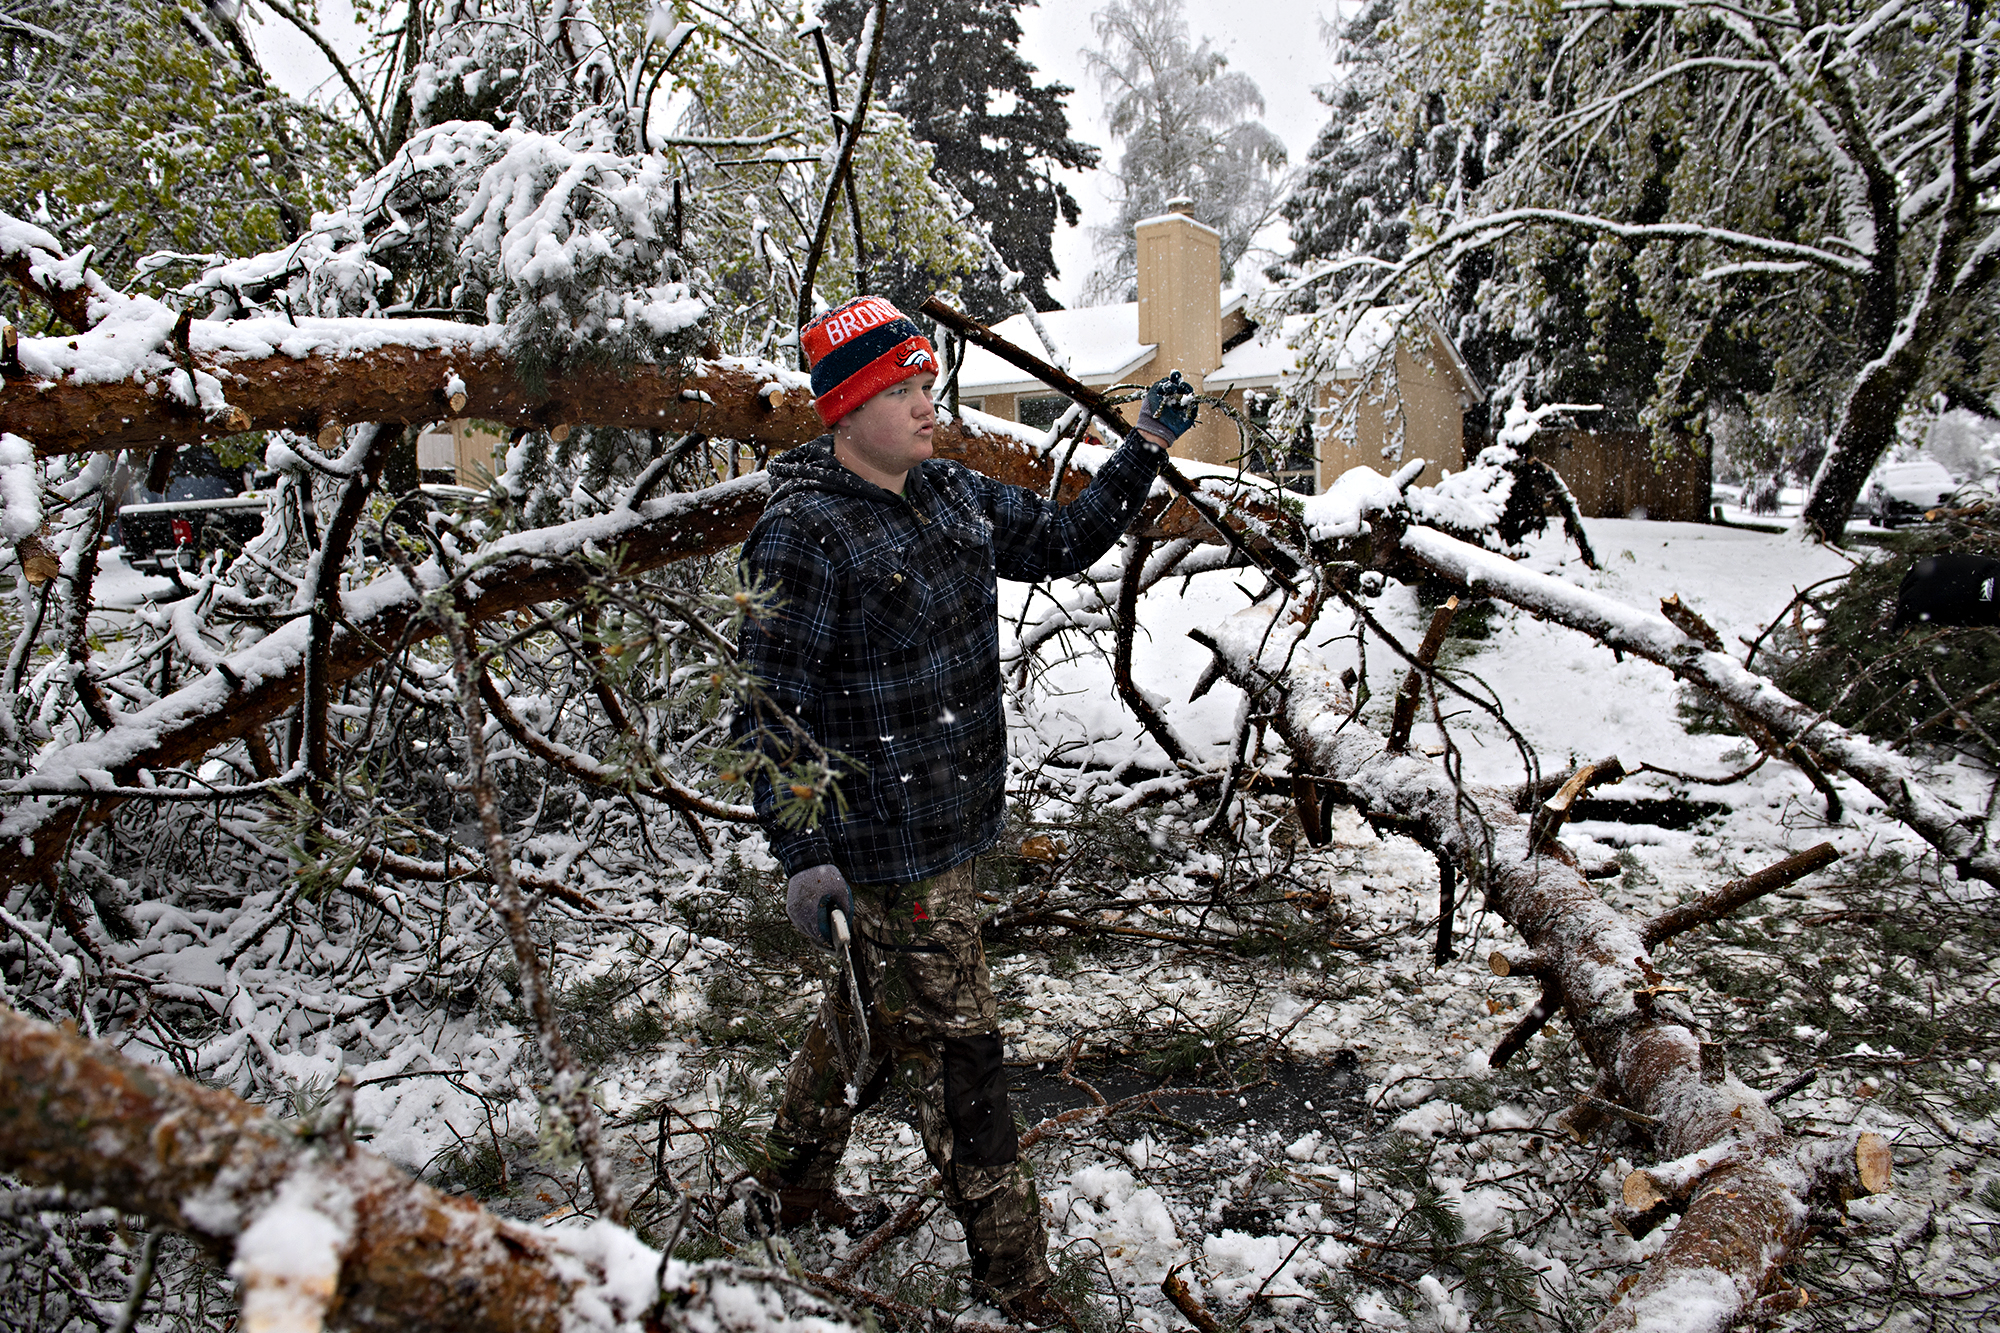 Ryan Dewater, 18, of Vancouver helps a neighbor clear a downed tree from their yard and the street after a rare April snowstorm hit the area Monday morning, April 11, 2022. Downed trees caused problems for residents and motorists on Monday.